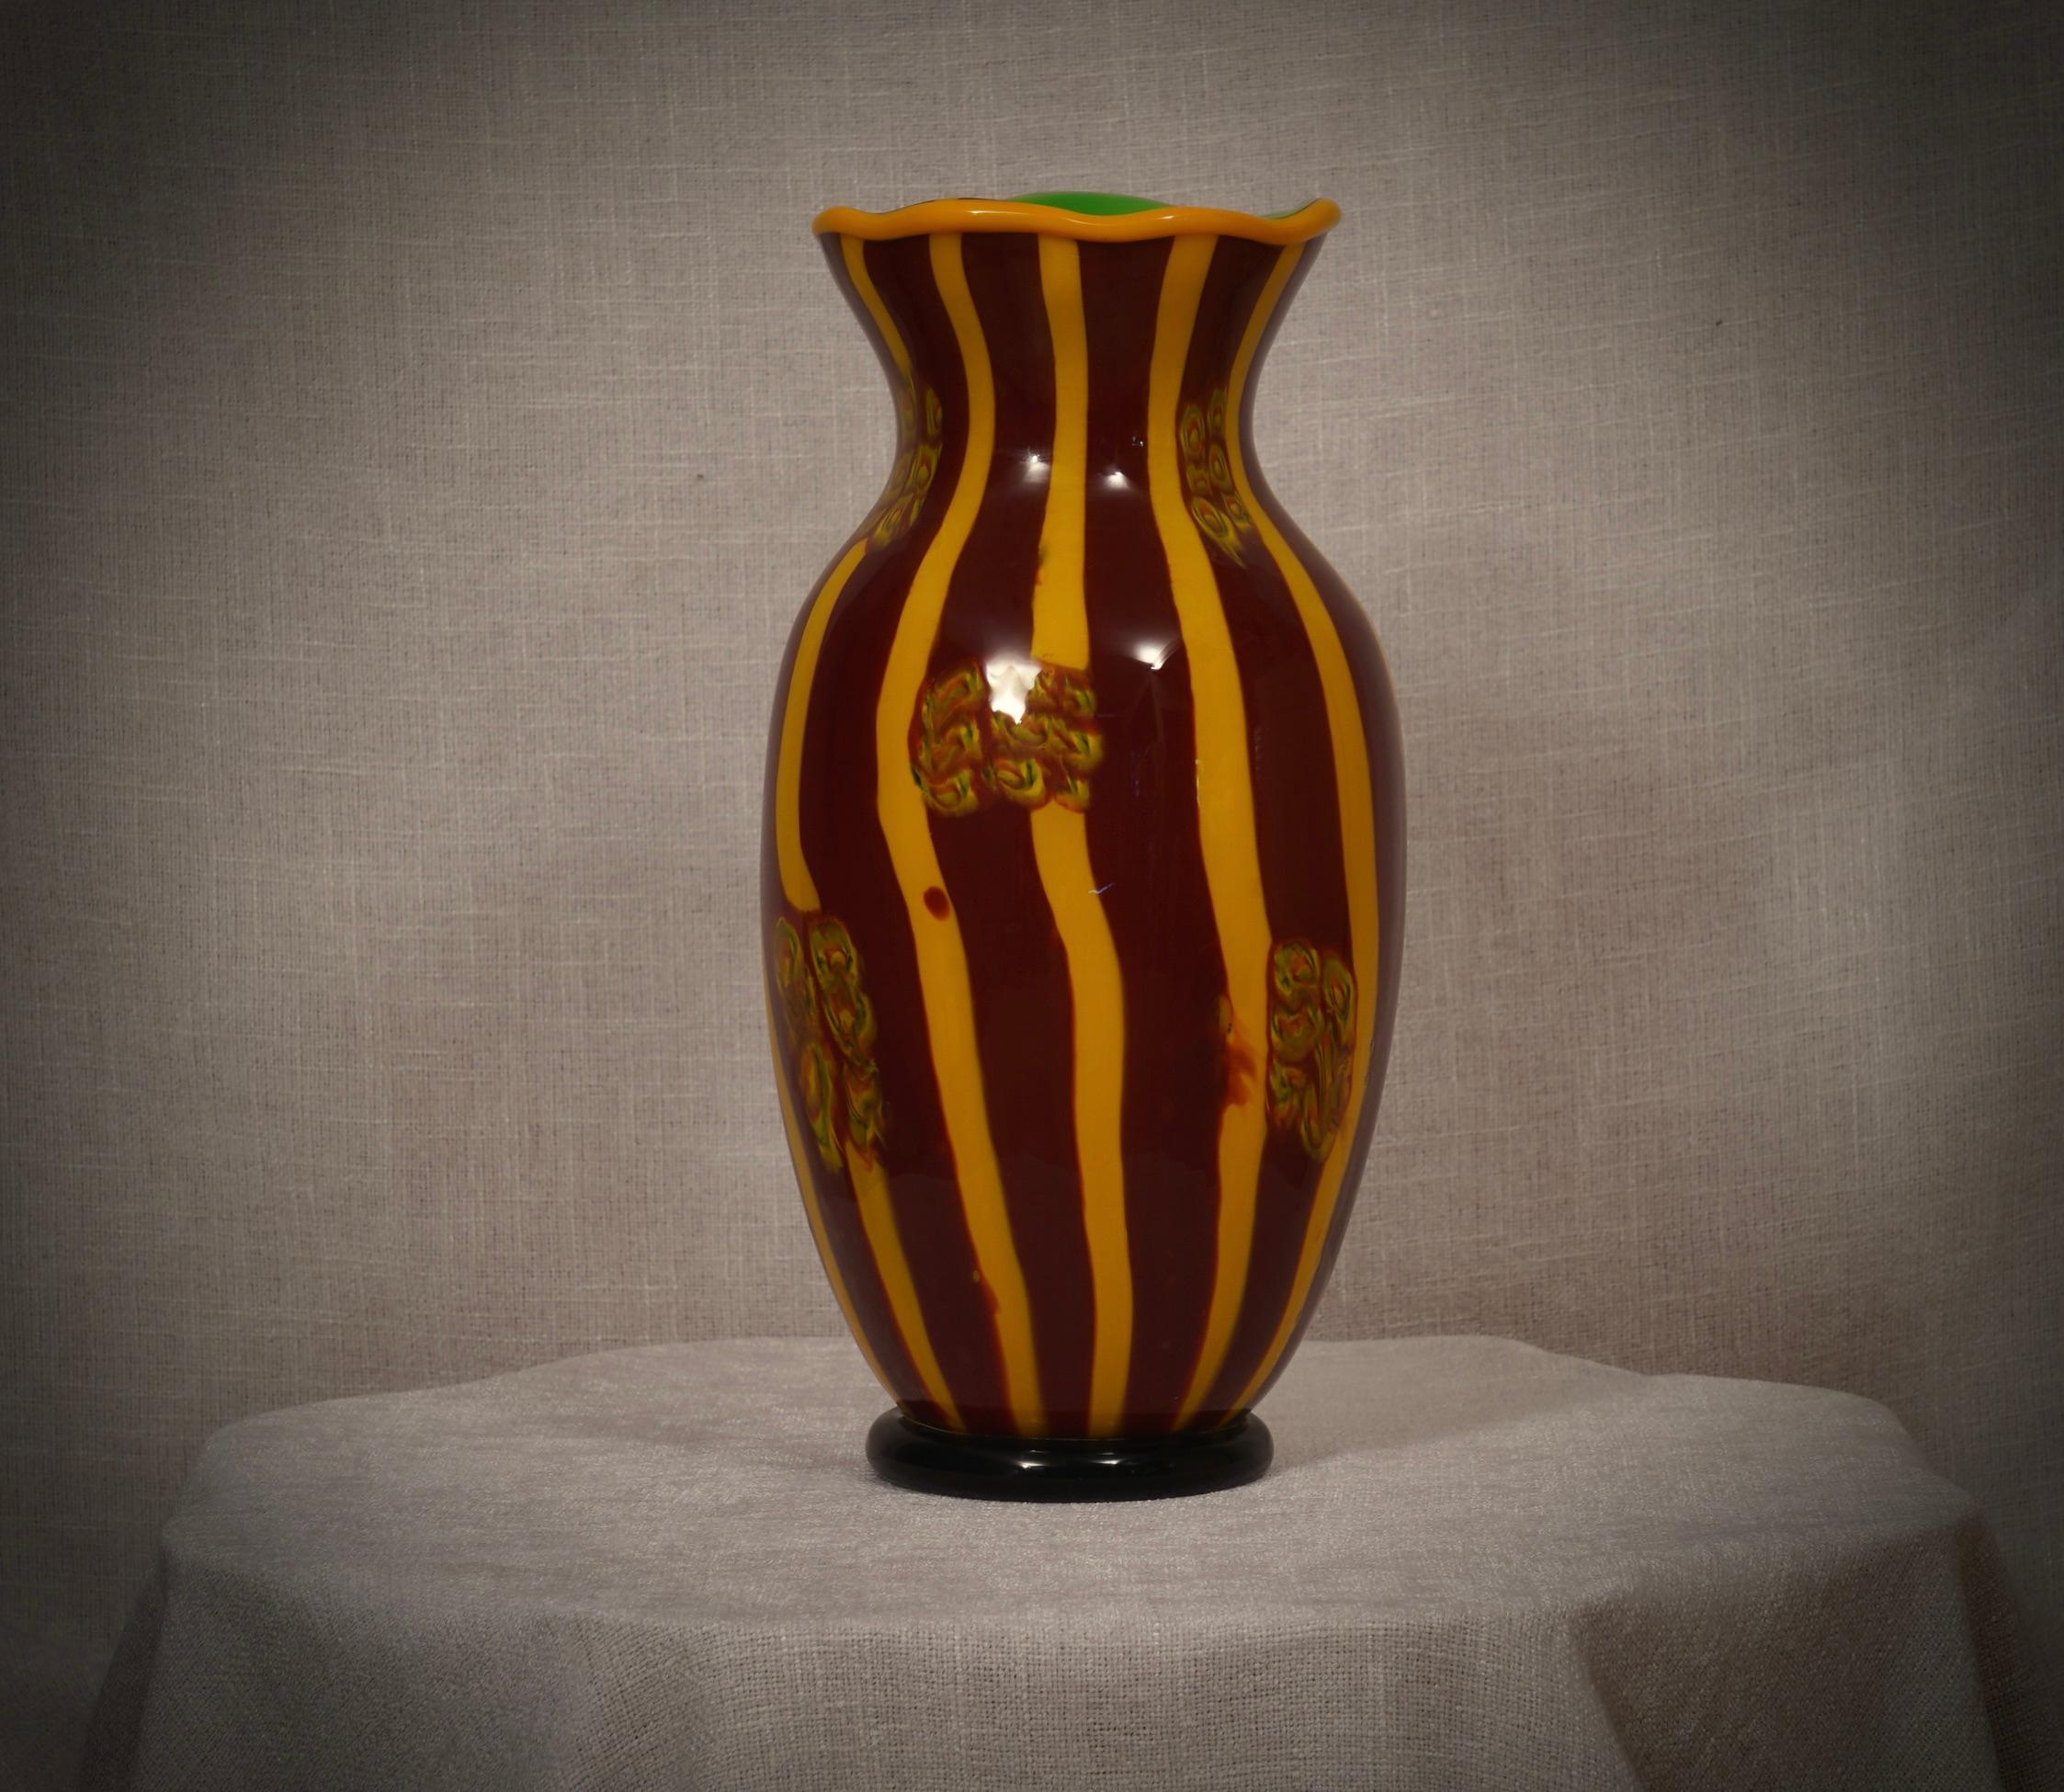 Fantastic vase from the Murano glassworks, both for its particular workmanship and for its colour, in fact the vase is red and yellow in color but has a green internal lining, called 